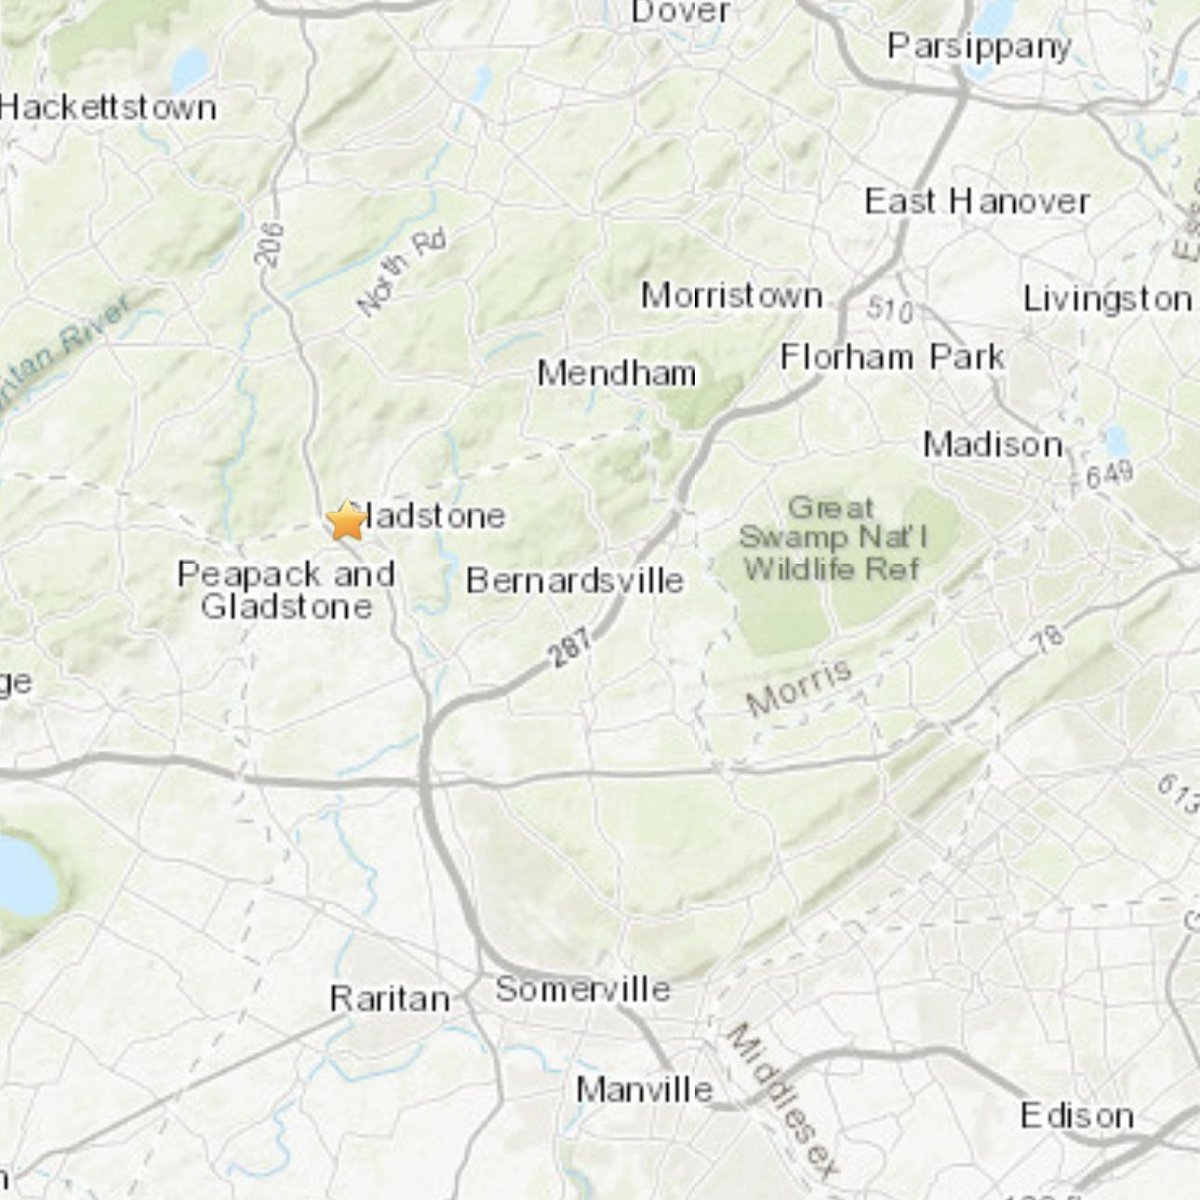 Did you feel it?! Another aftershock at 7:01 AM. M 2.6 - 1 km WNW of Gladstone, New Jersey @News12NJ